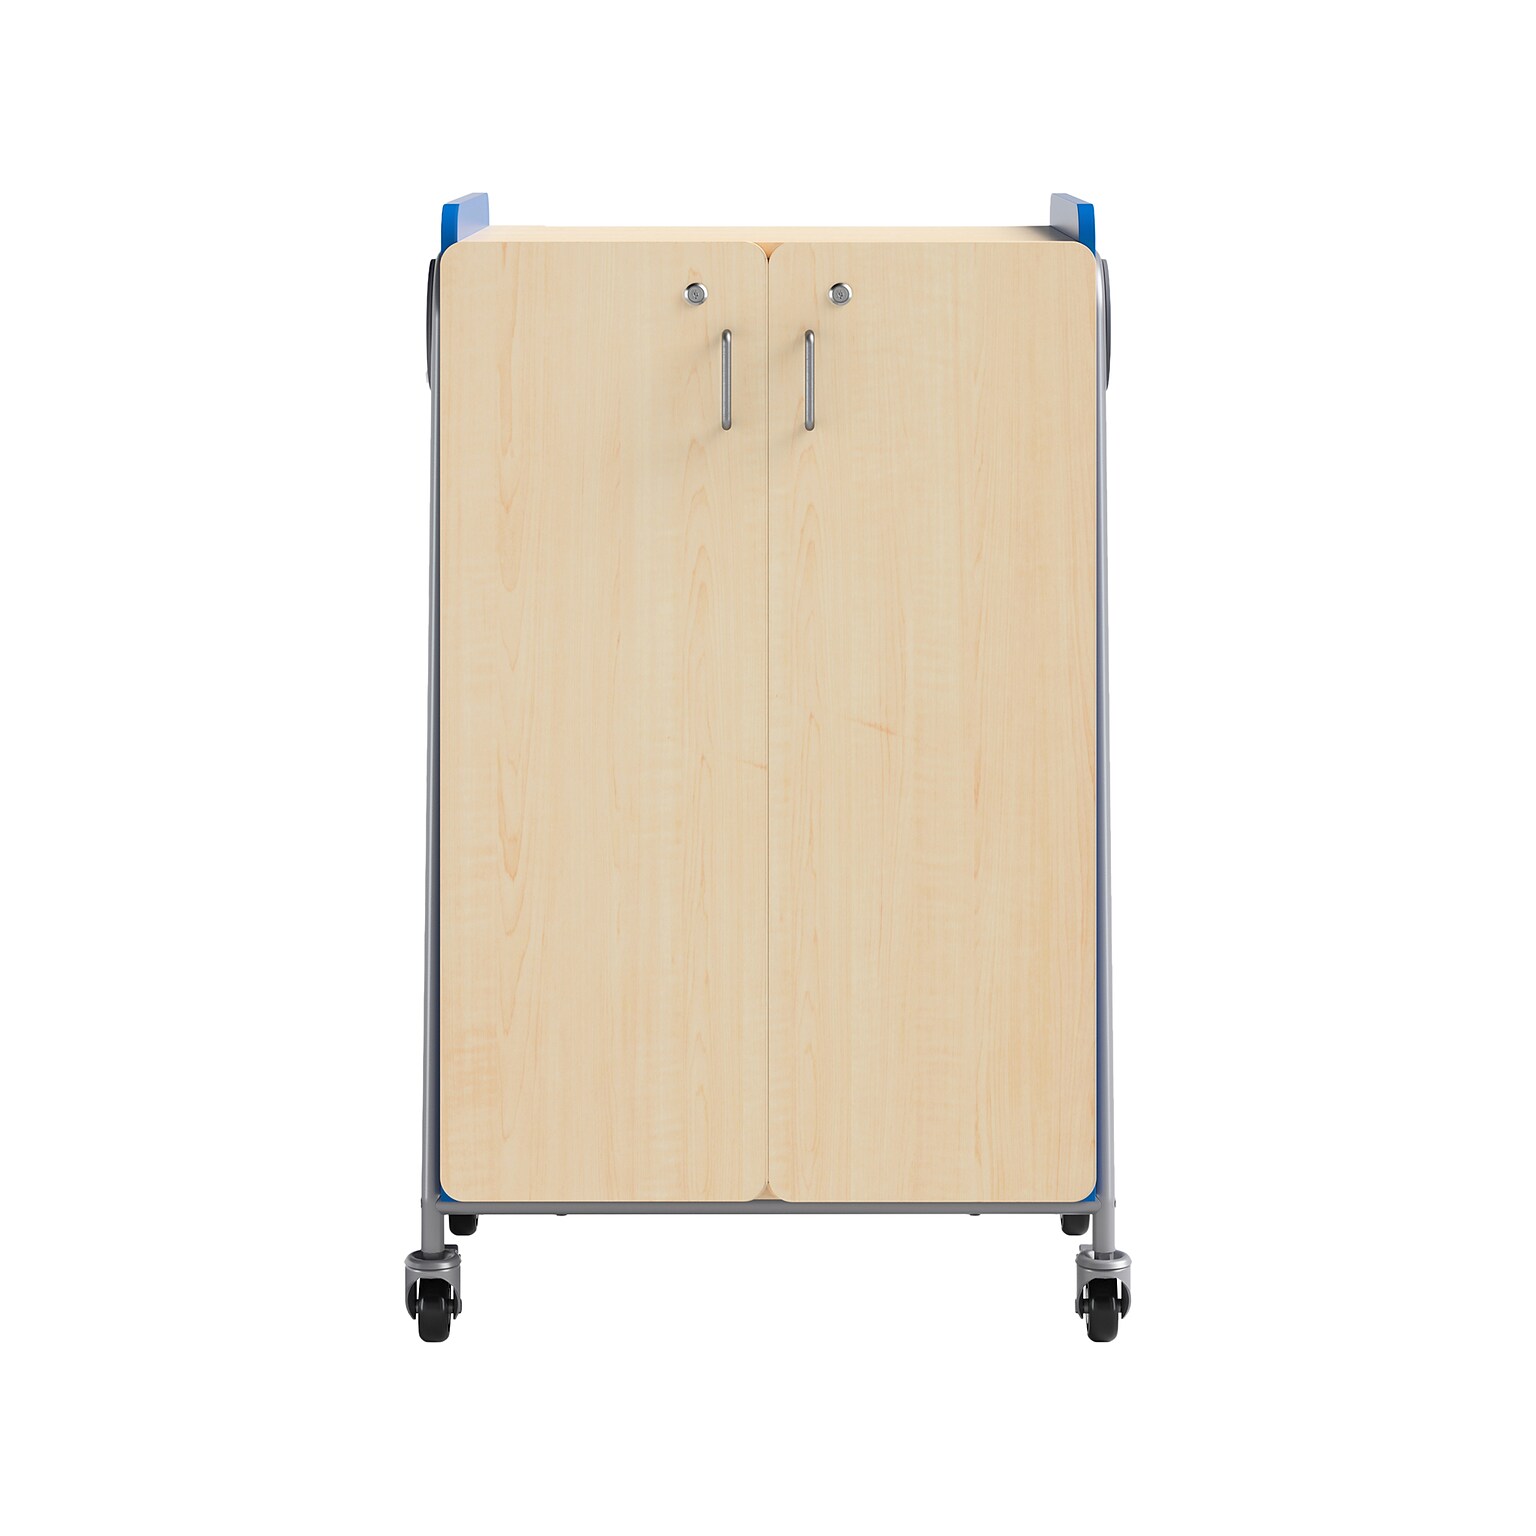 Safco Whiffle Typical 14 48 x 30 Particle Board Double-Column Mobile Storage, Spectrum Blue (3934SBU)